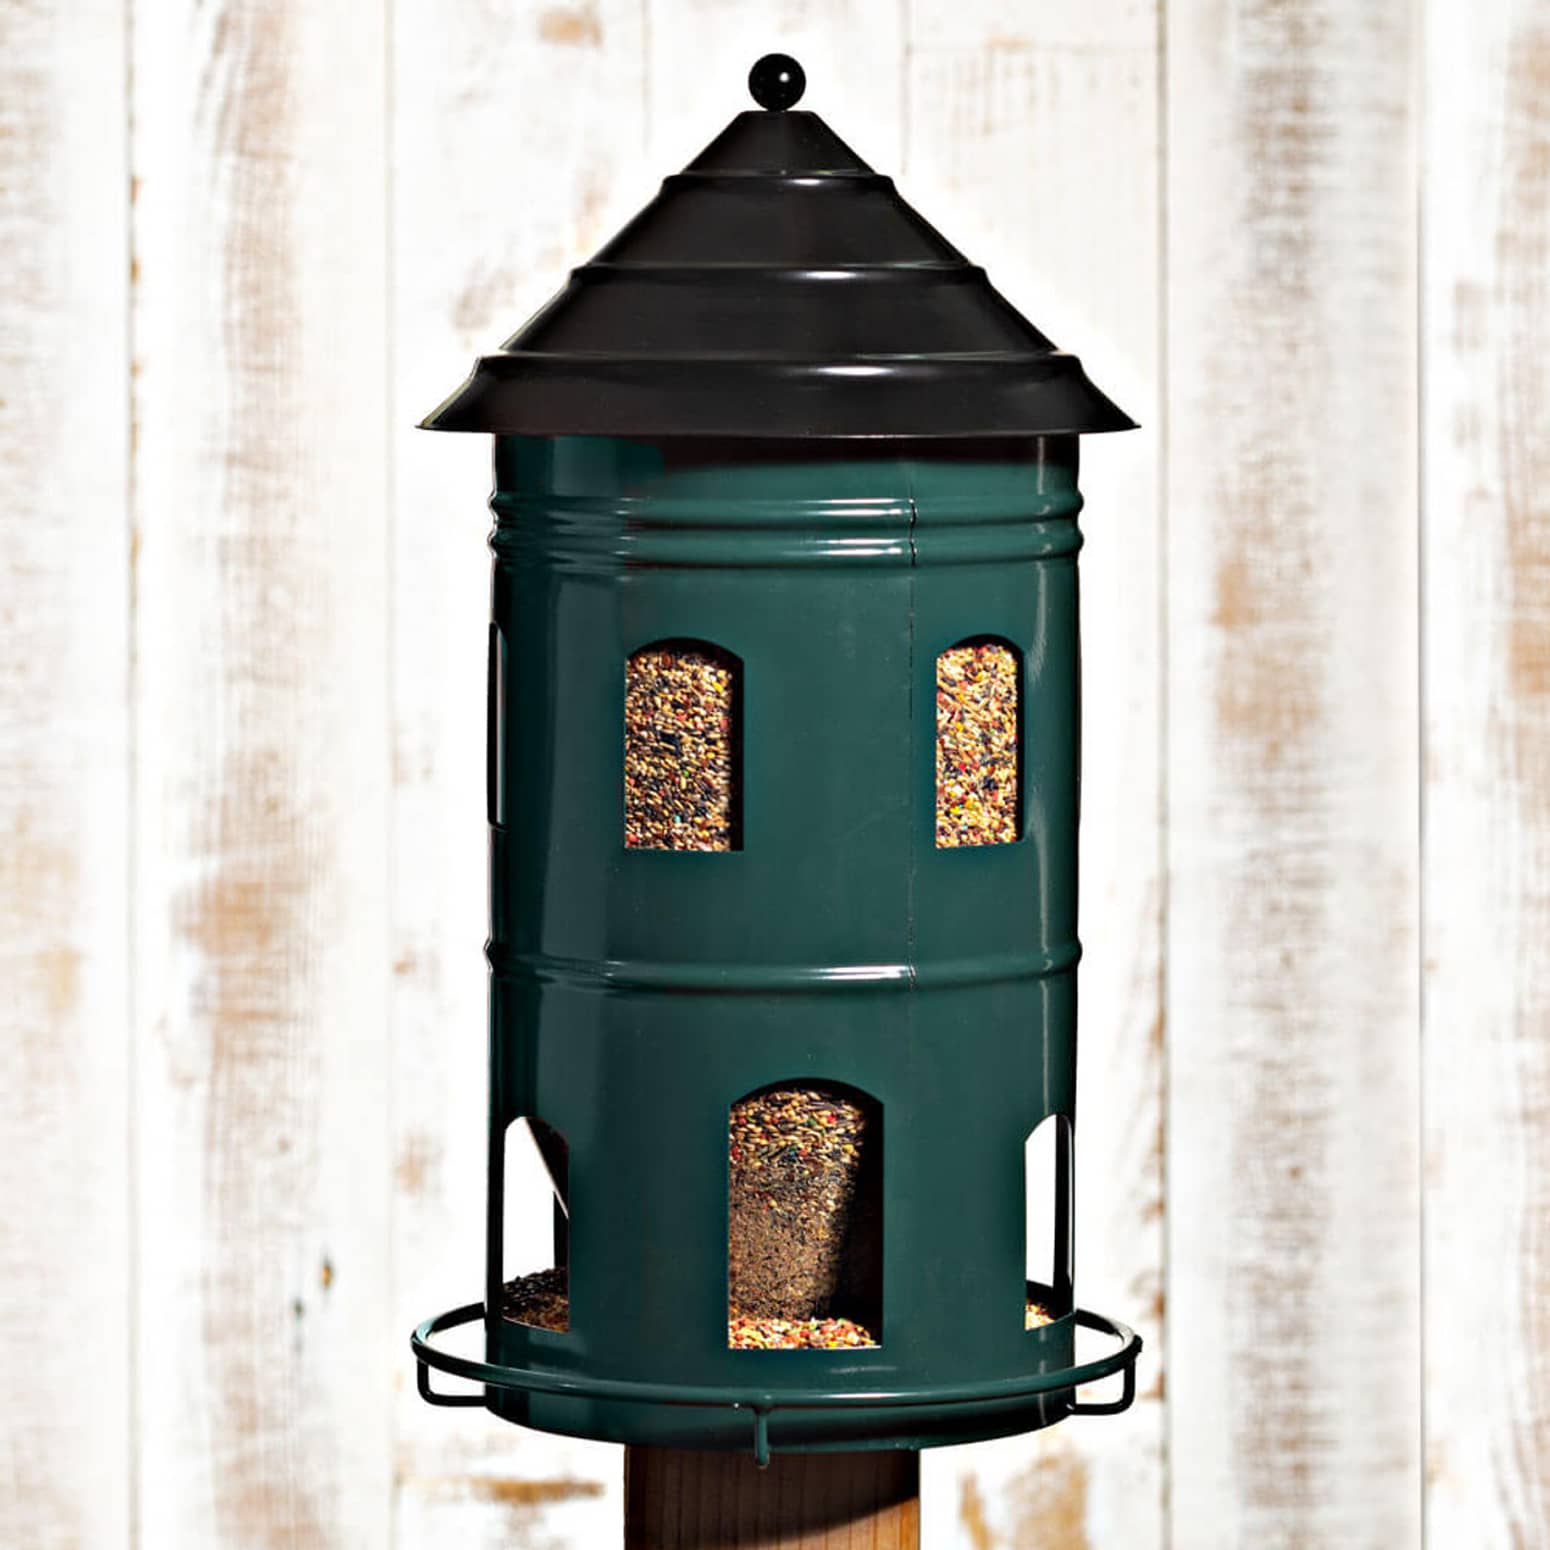 Giant 6 Liter Bird Feeder - Holds 2-3X More Seed, Nuts, and Berries